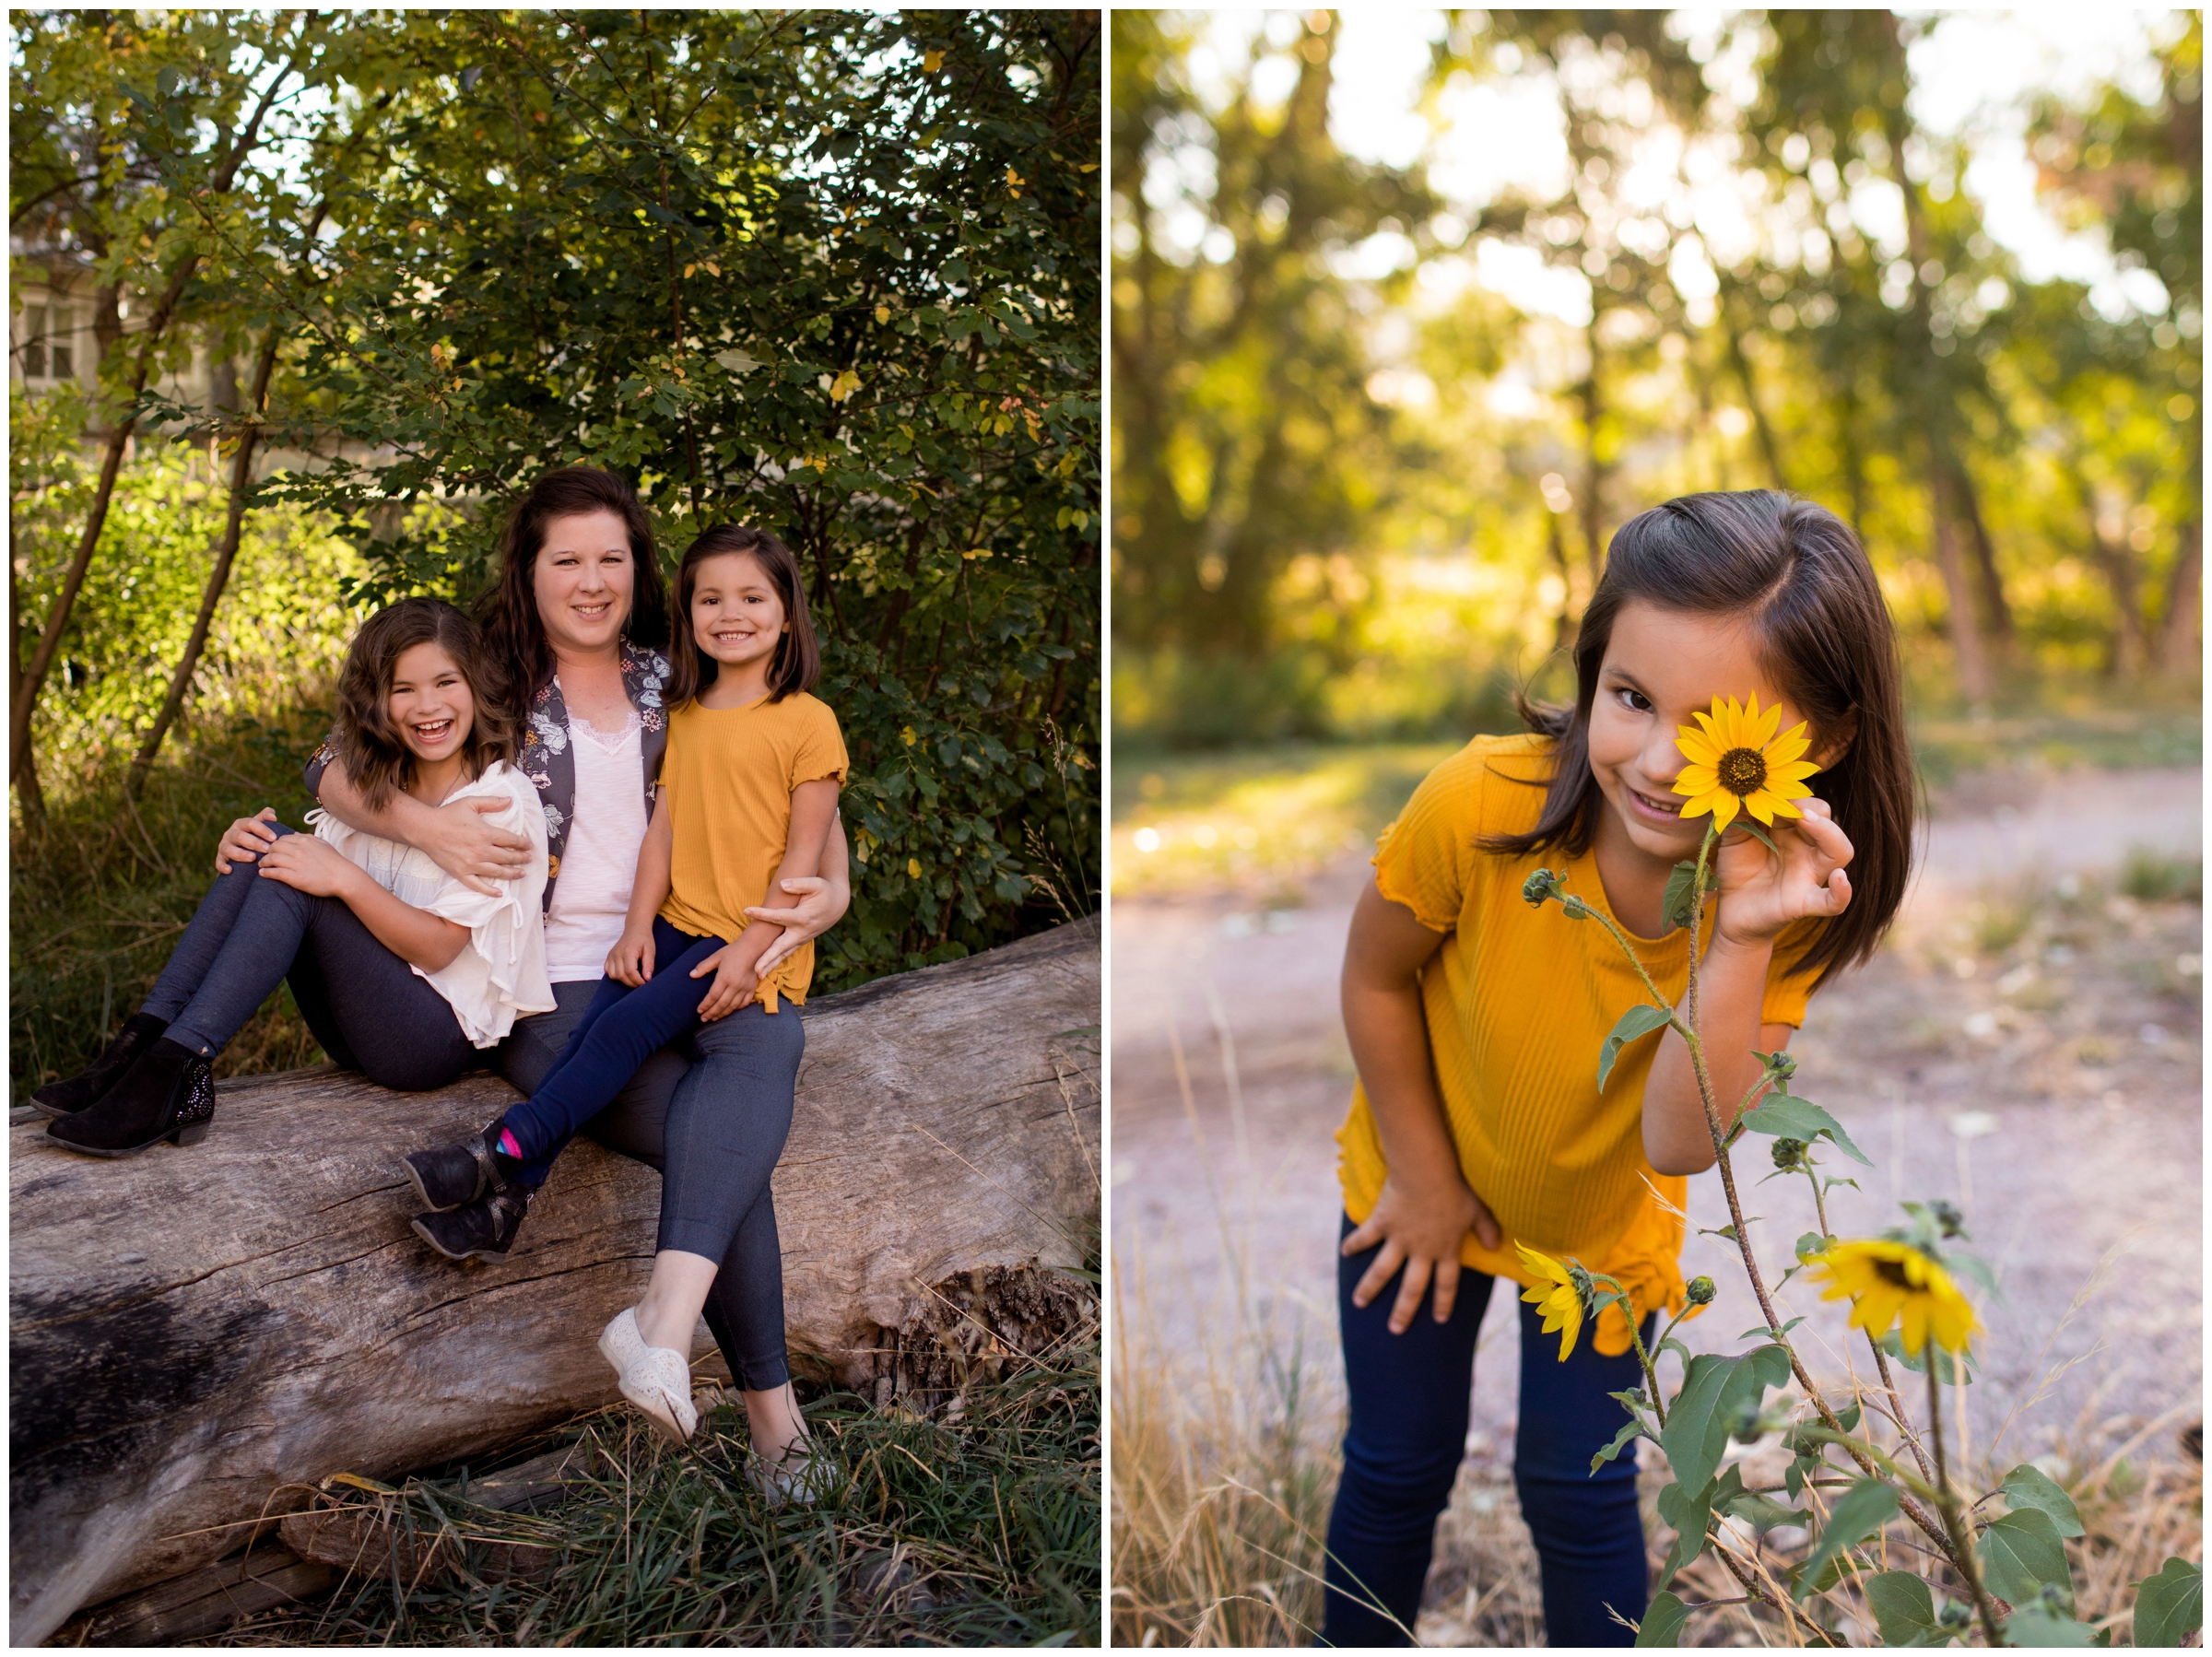 Family photos at Bobcat Ridge Natural Area in Fort Collins by Loveland Colorado family photographer Plum Pretty Photography